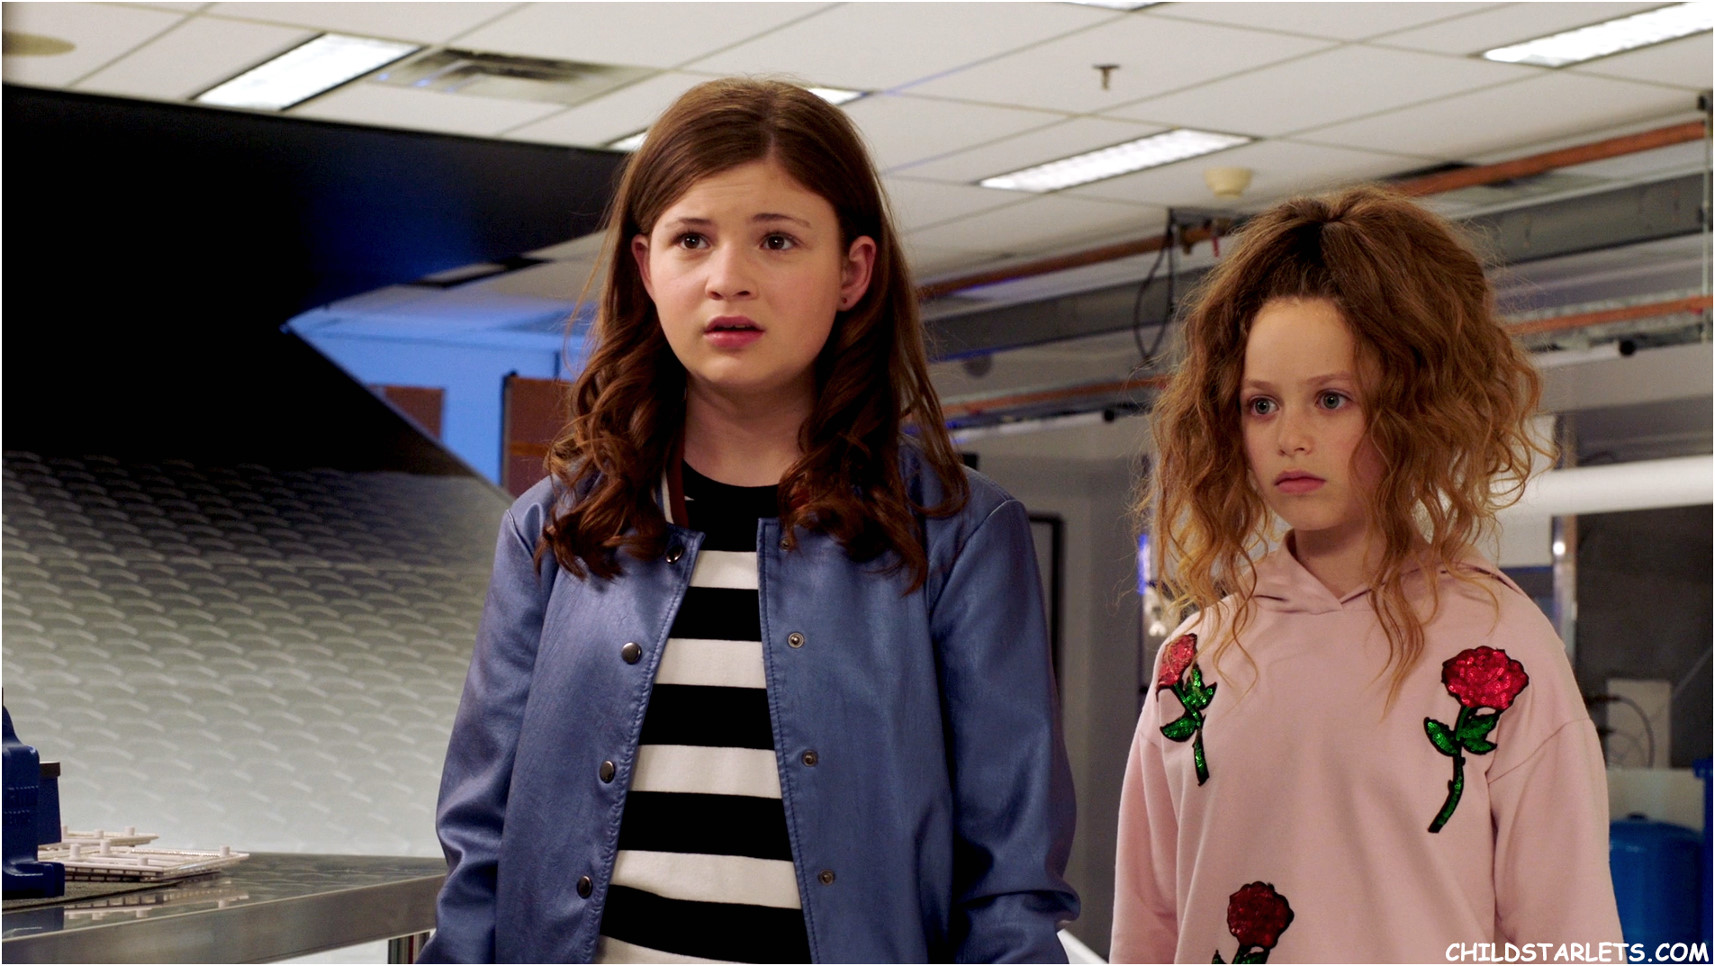 Sophie Pollono / Sofia Rosinsky
"Fast Layne" - 2019/HD
"Helicopter Parents"